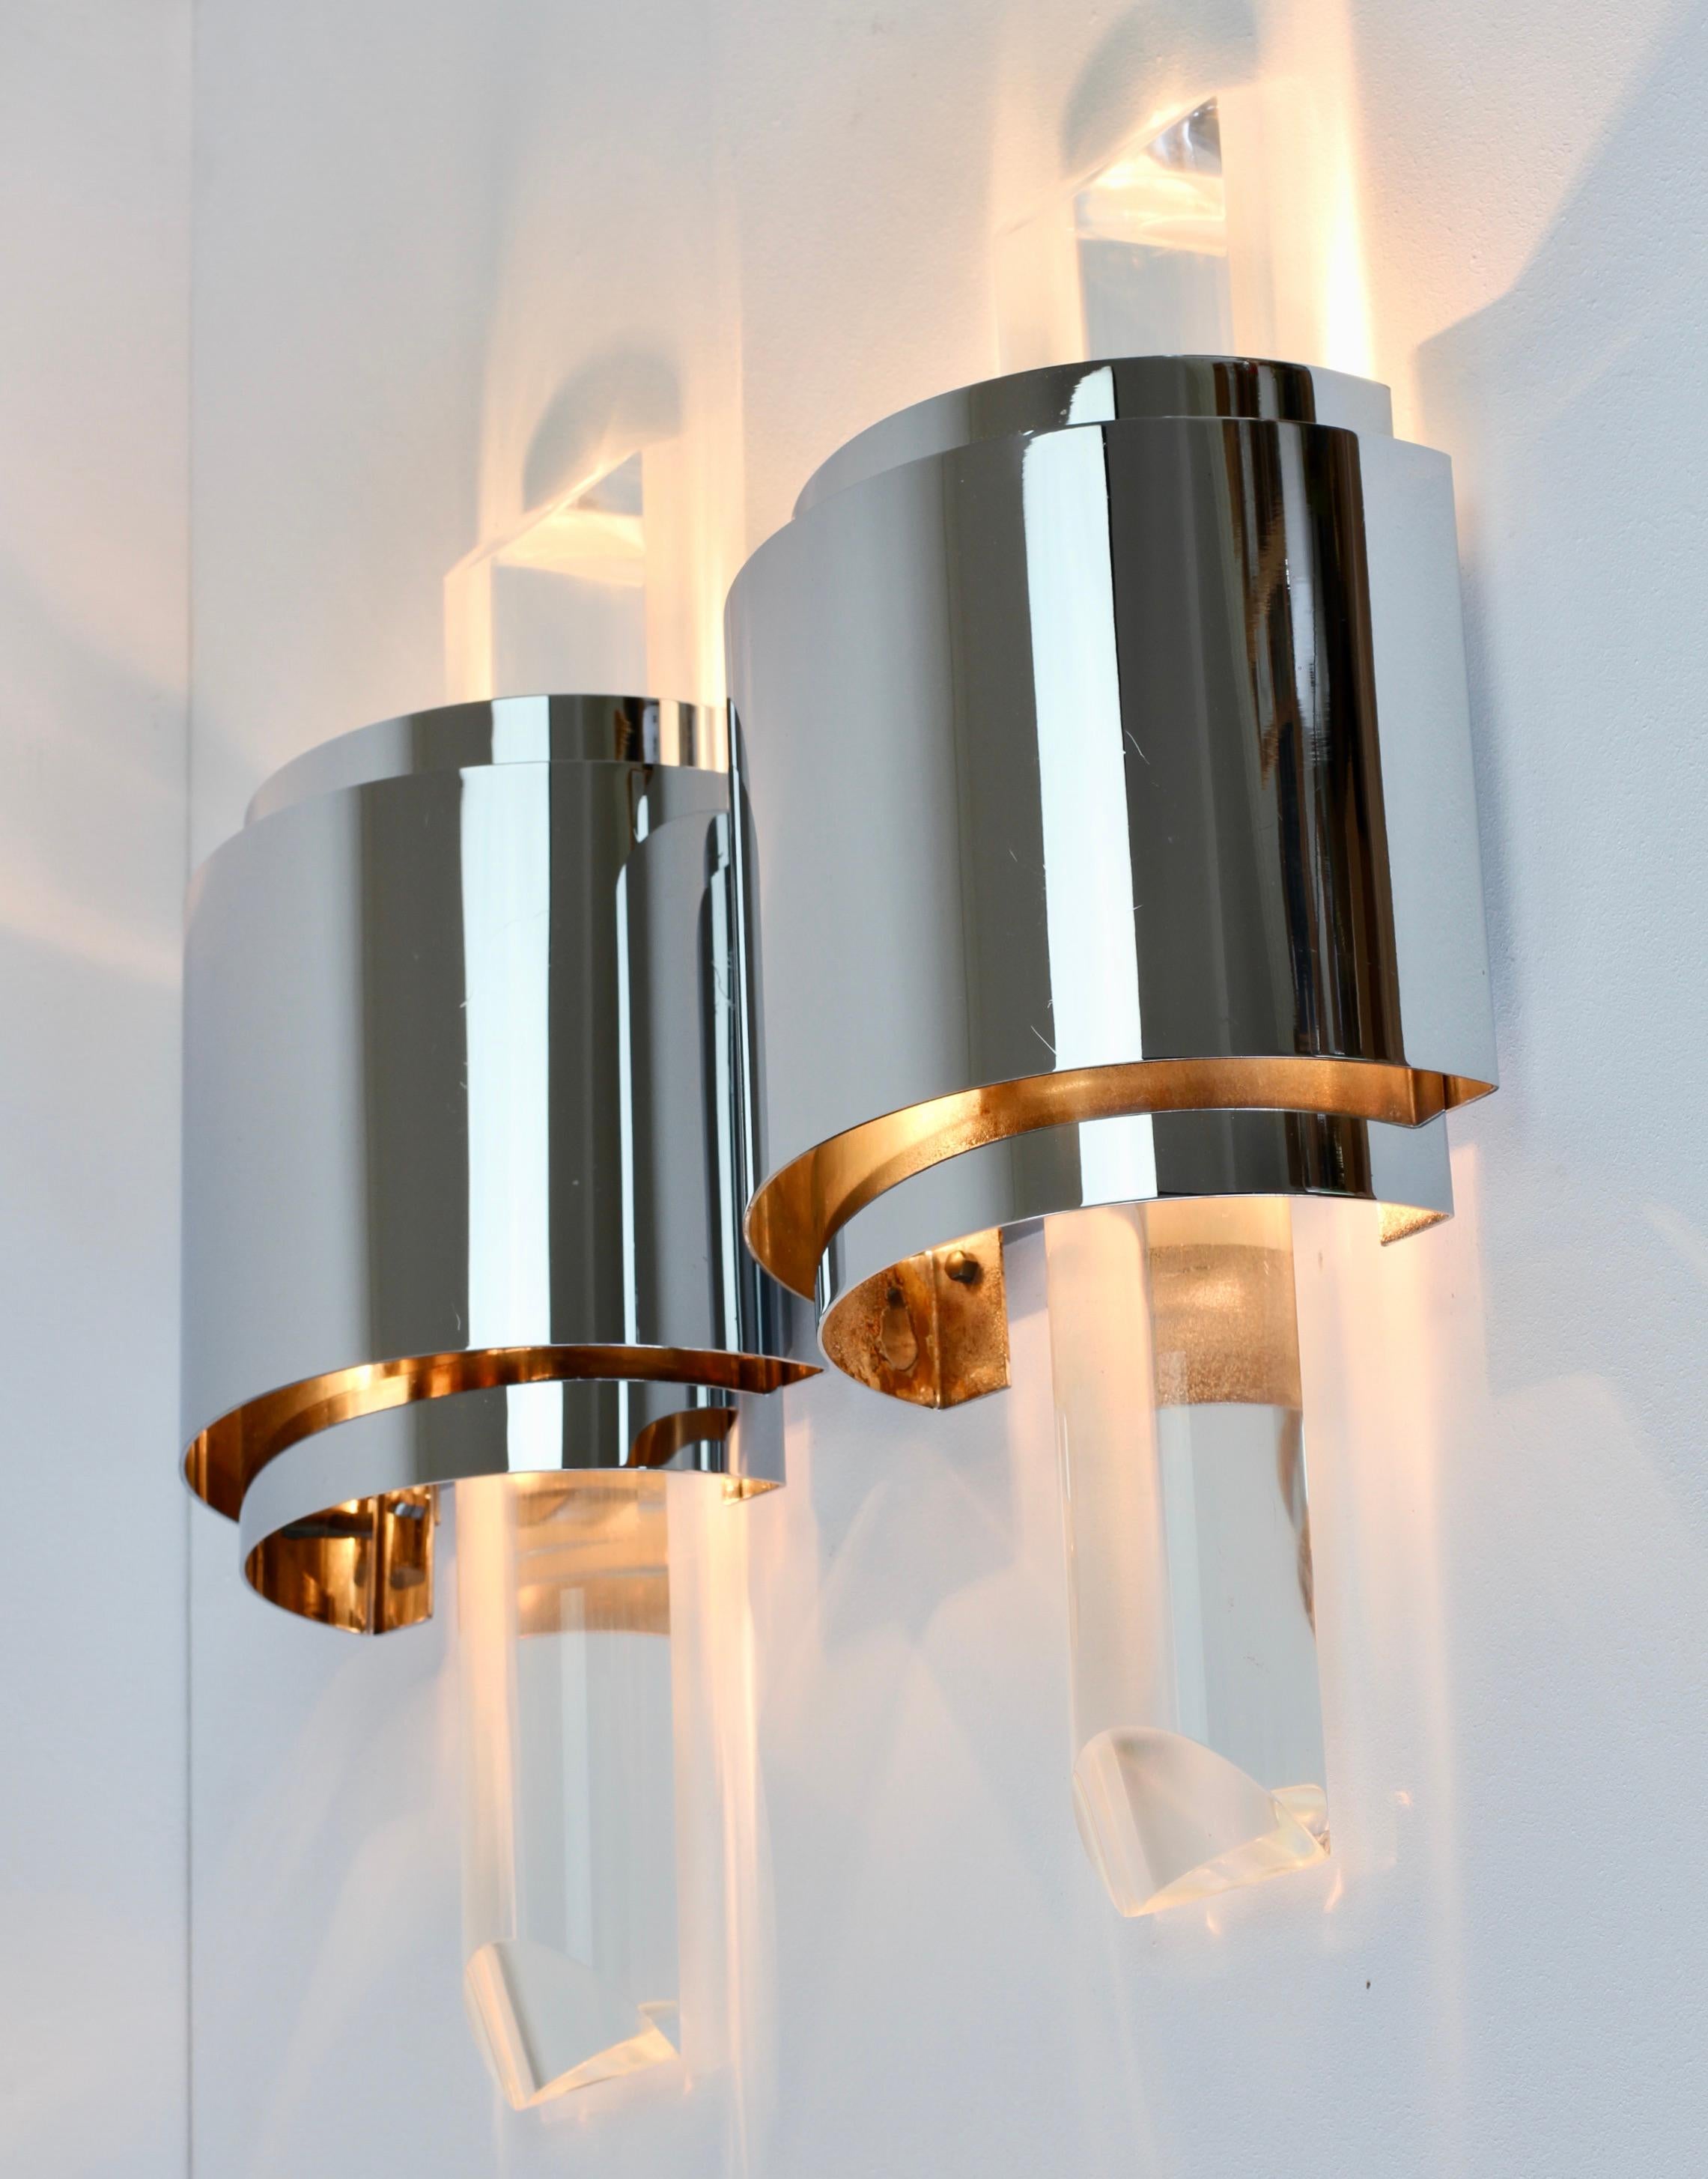 Large Hollywood Regency Lucite and Chrome Wall Lights or Sconces, circa 1970s For Sale 1